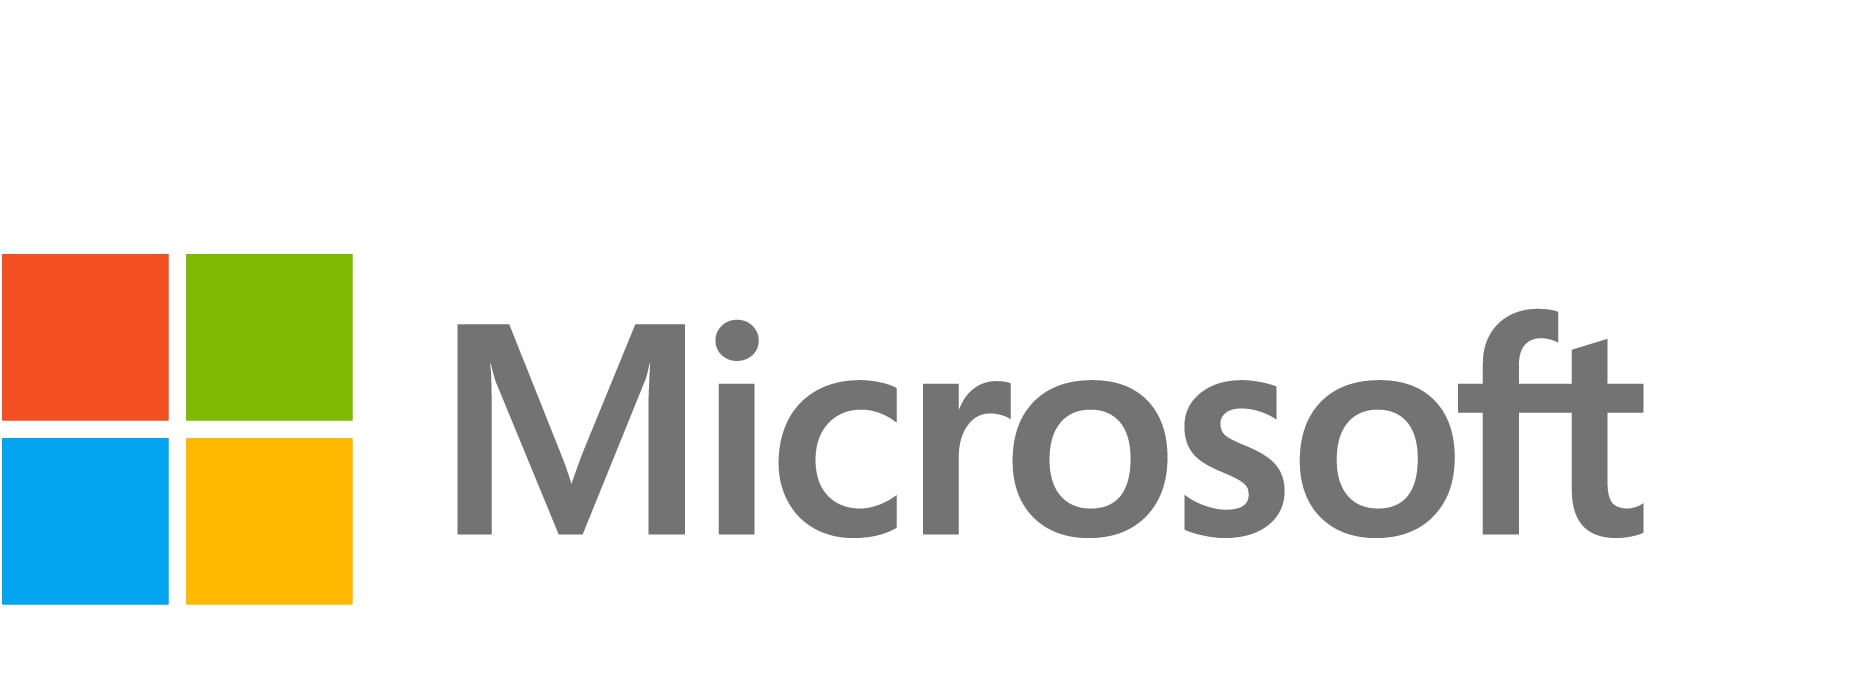 Microsoft System Center Data Protection Manager Client ML - software assurance - 1 user